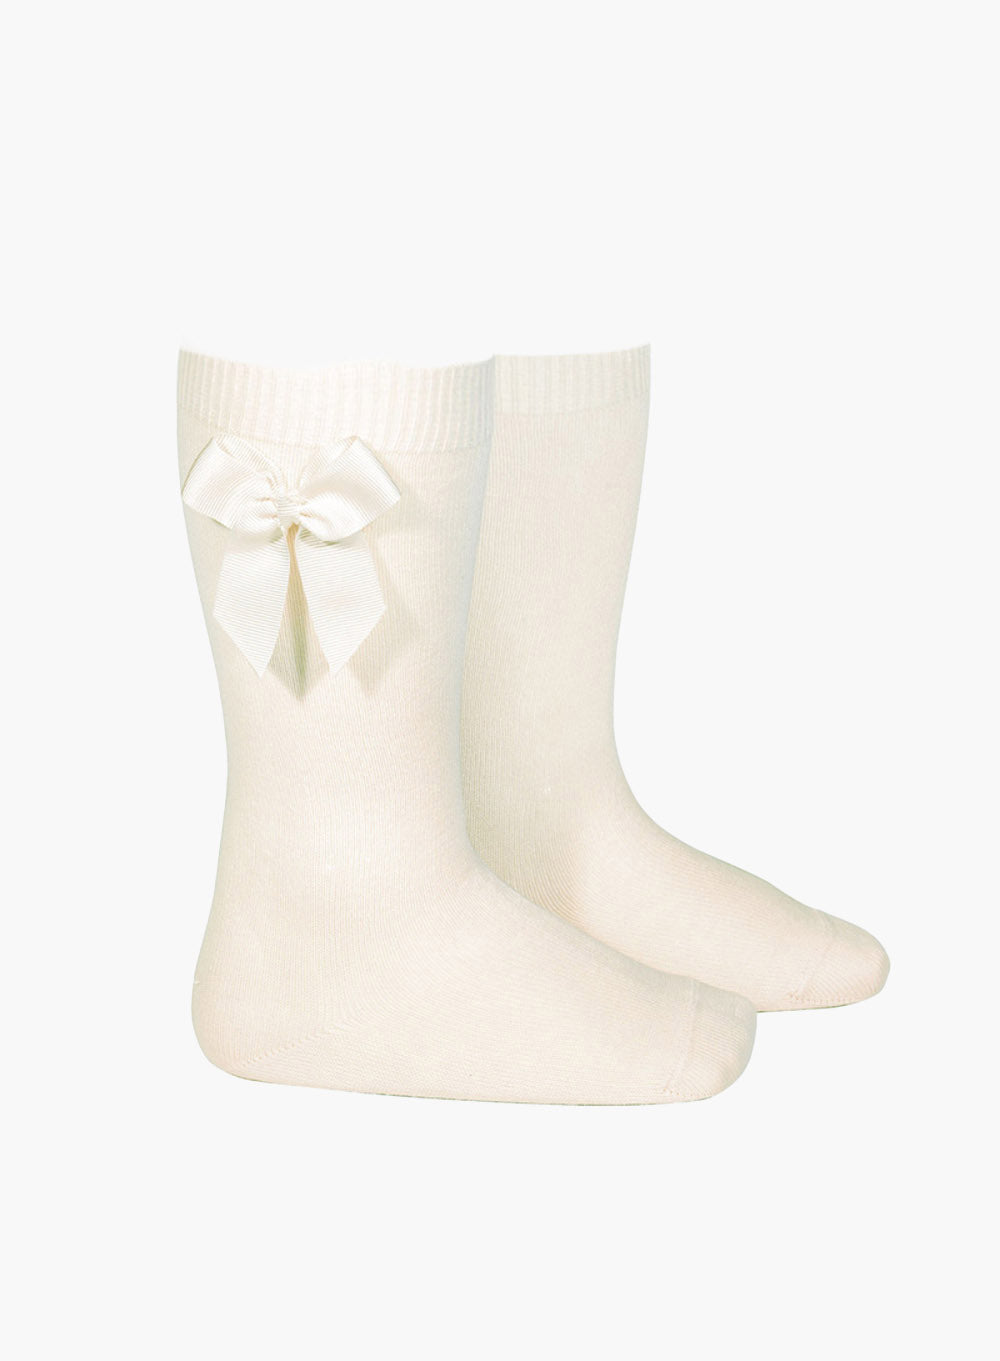 Girls' Socks and Tights, Shop Online